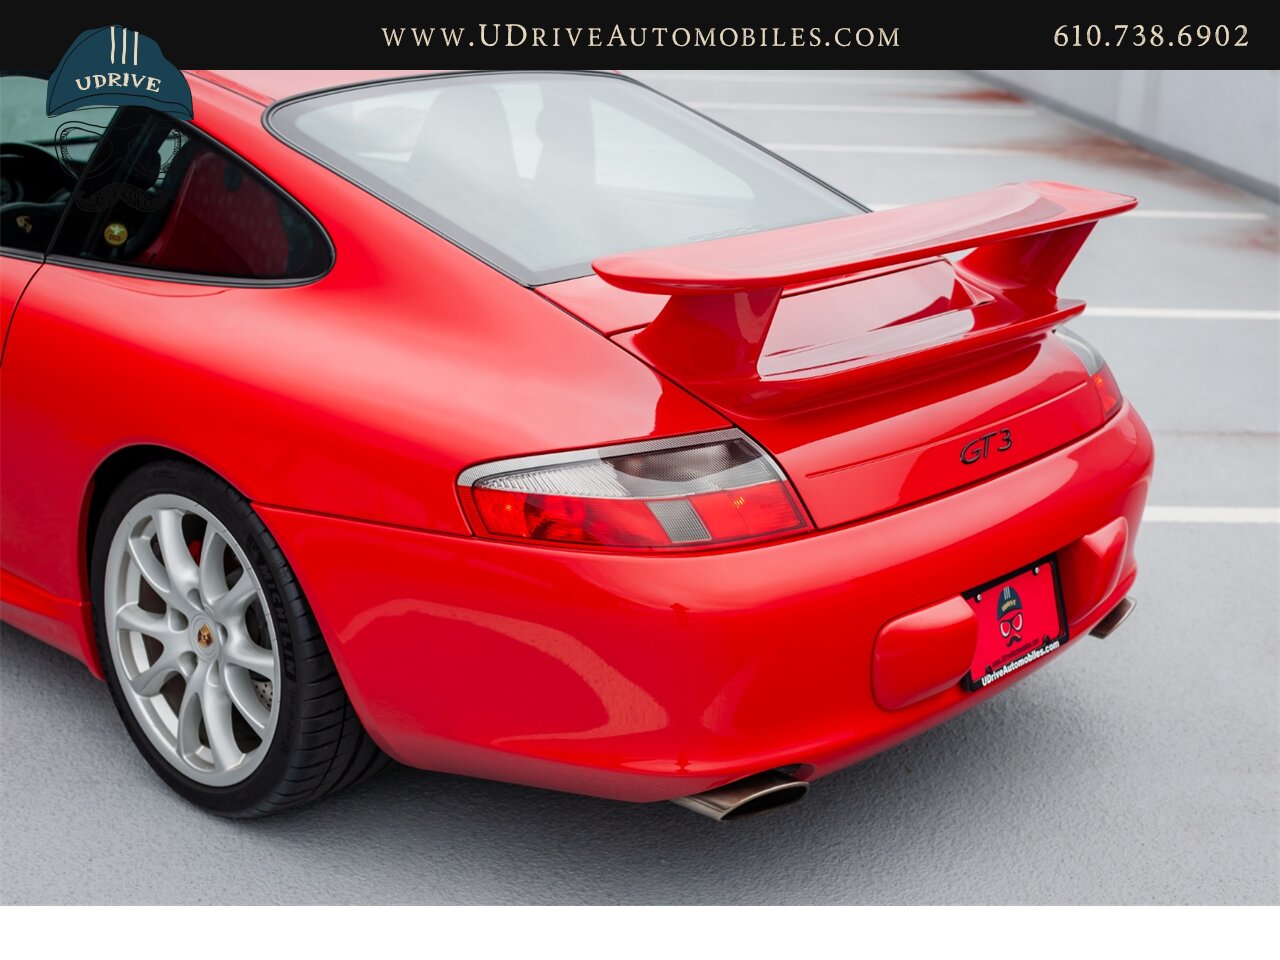 2004 Porsche 911 996 GT3 Guards Red Sport Seats Painted Hardbacks  Painted Center Console 18k Miles - Photo 26 - West Chester, PA 19382